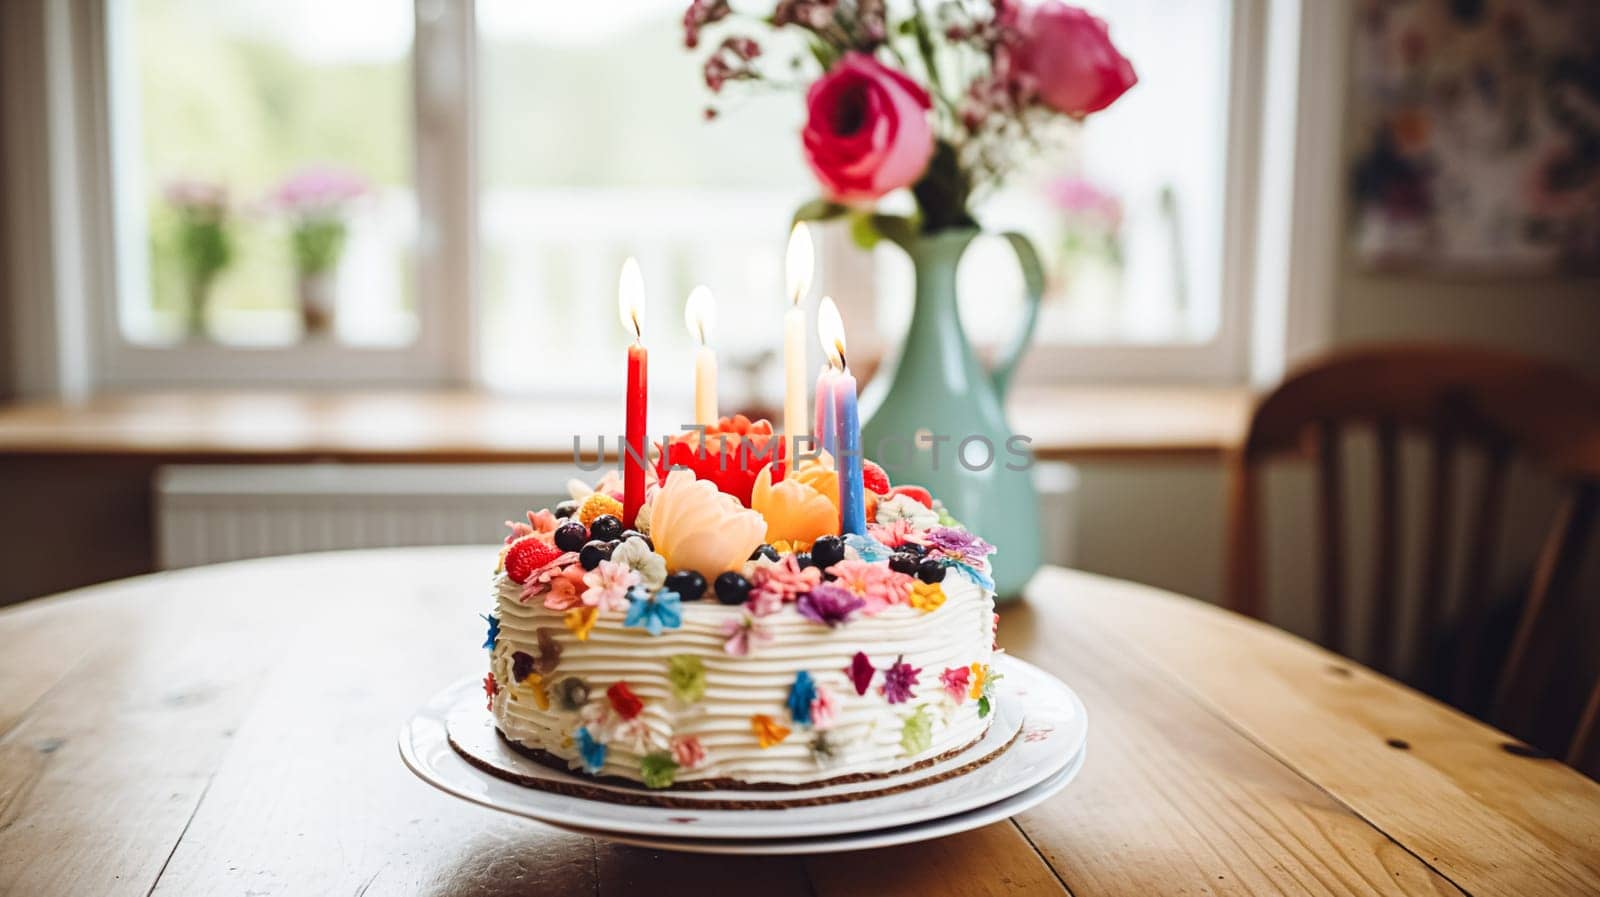 Homemade birthday cake in the English countryside house, cottage kitchen food and holiday baking recipe by Anneleven